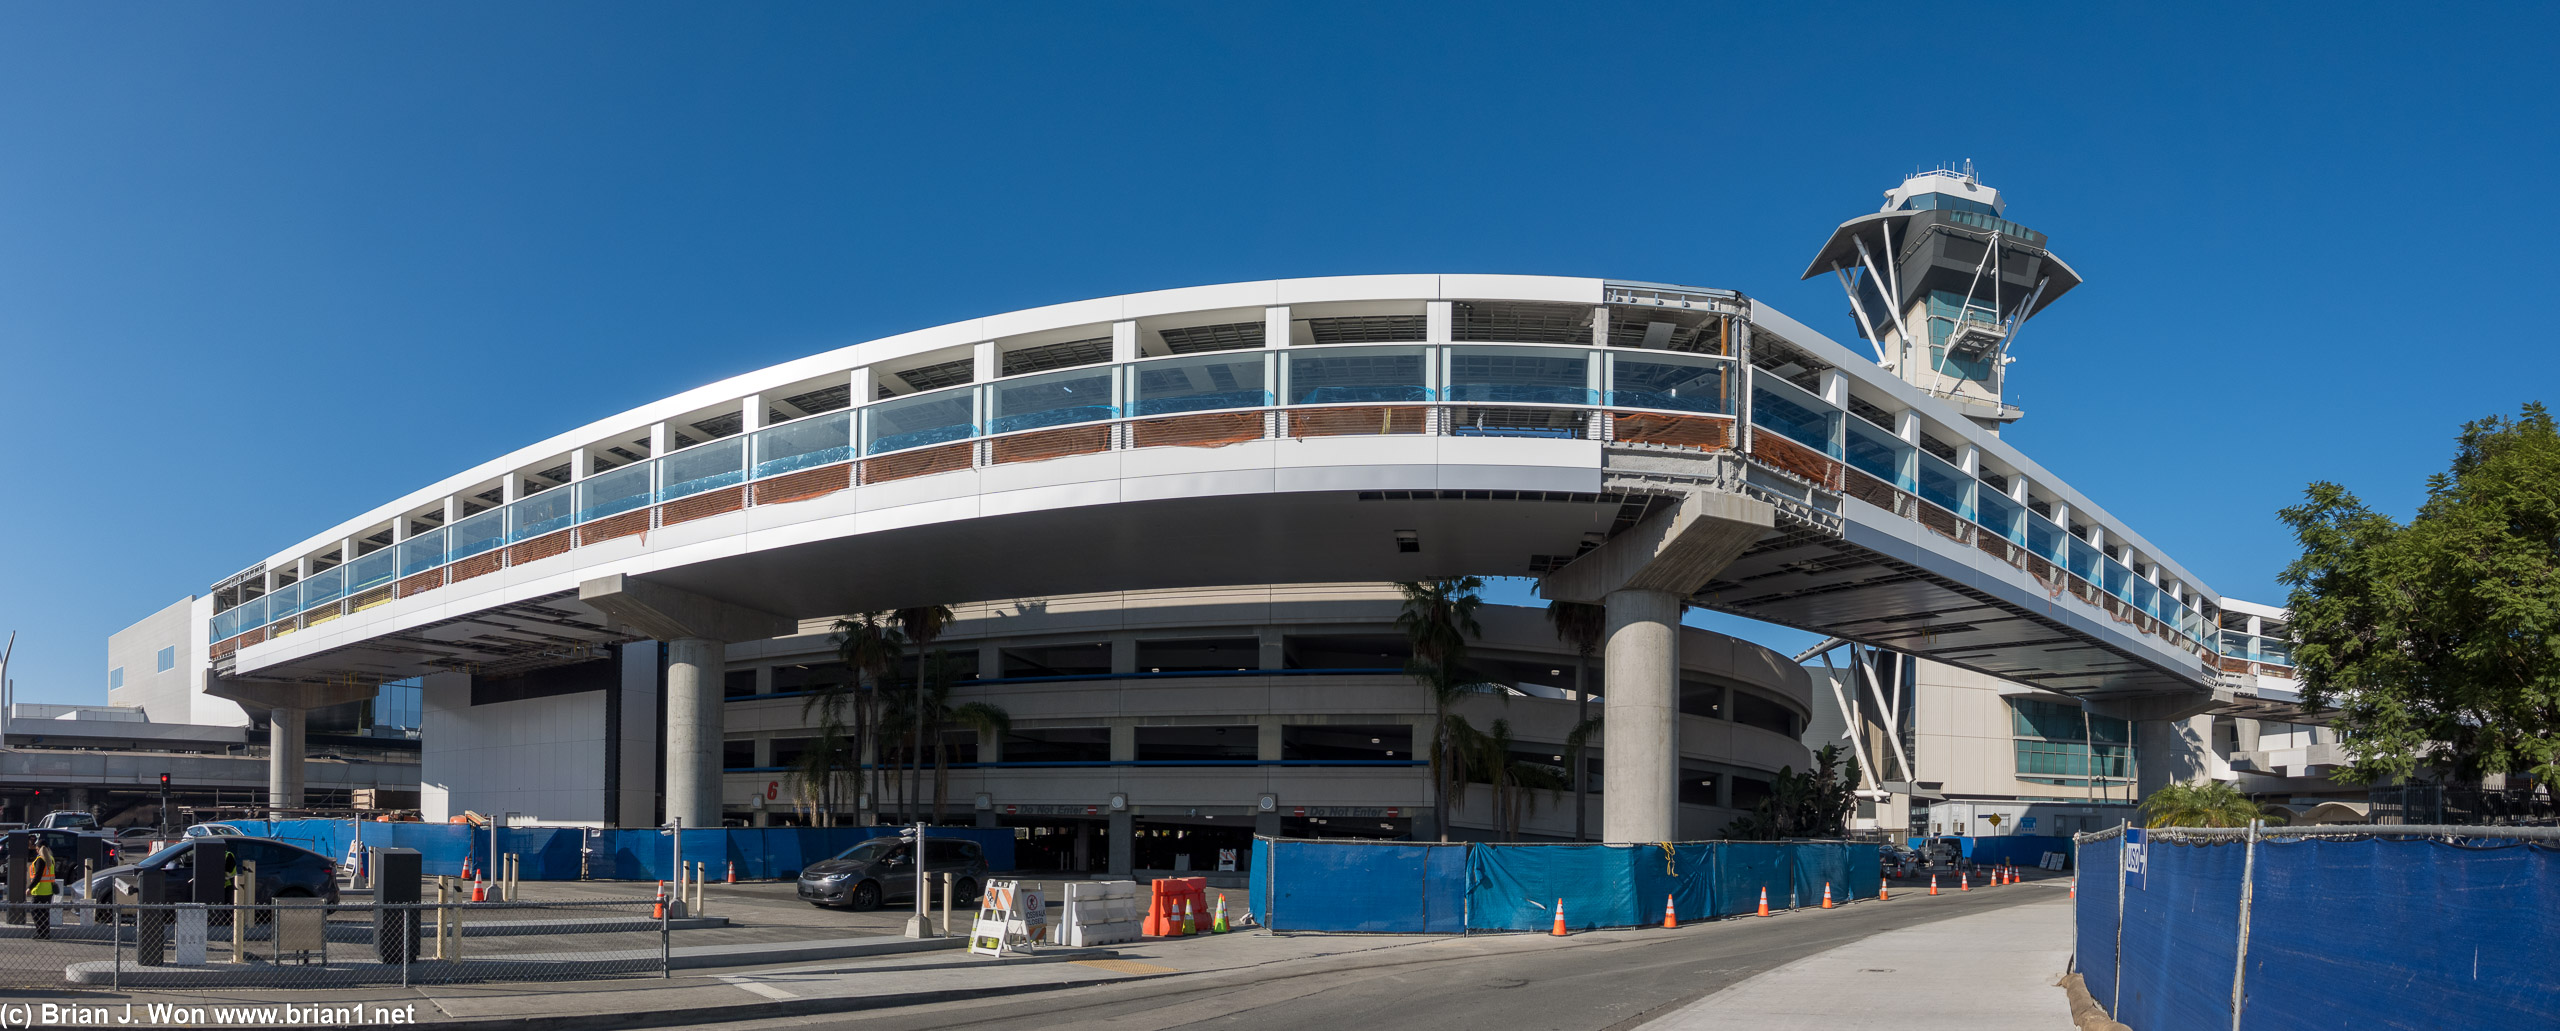 Automated people mover under construction, bridge to terminals 1, 2, 5, and 6.